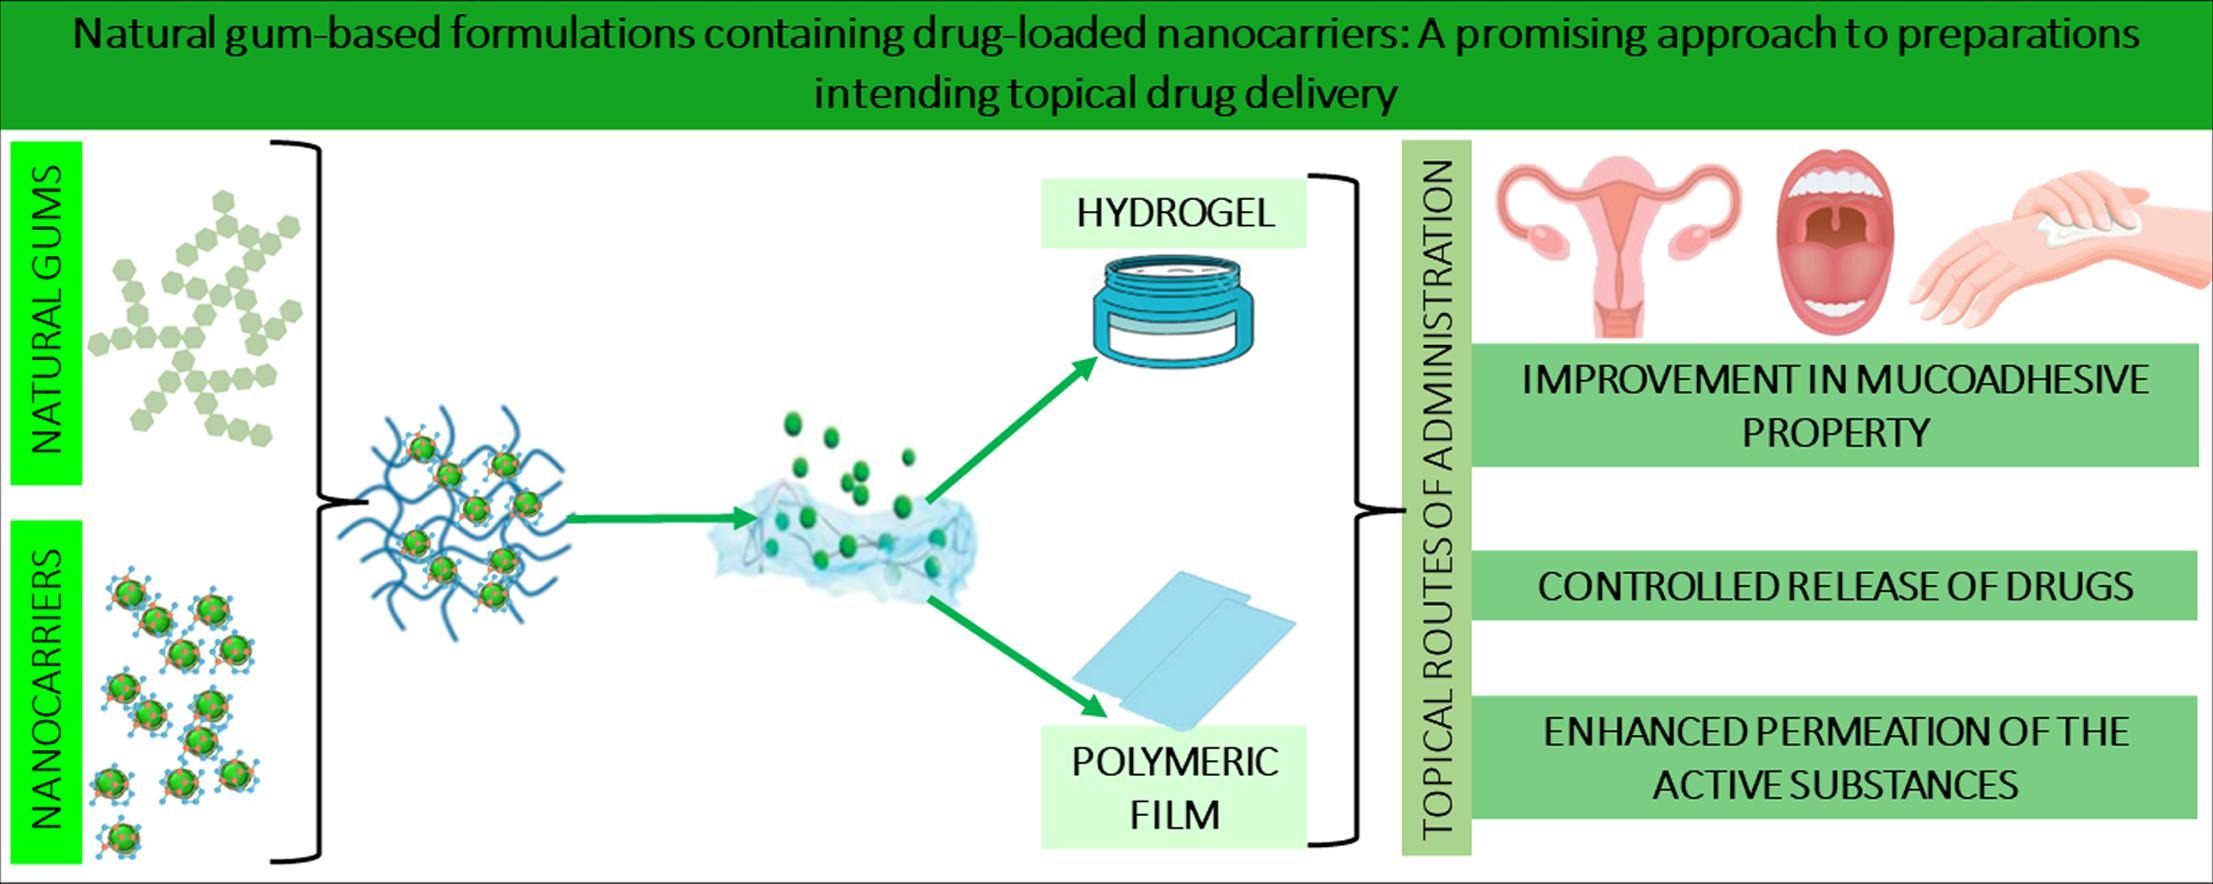 The use of natural gums to produce nano-based hydrogels and films for topical application